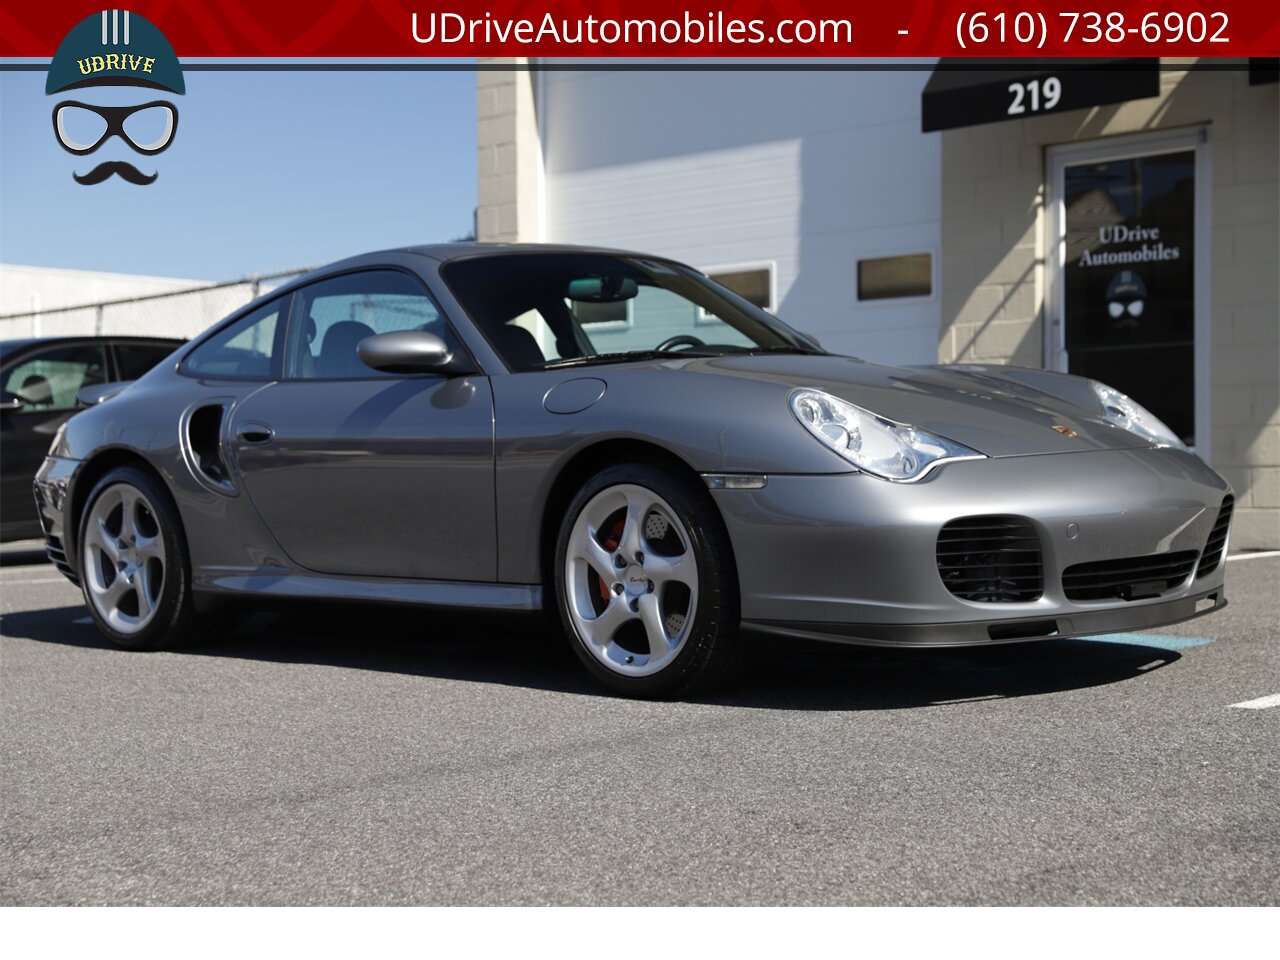 2003 Porsche 911 996 Turbo X50 Power Kit 6 Speed Seal Grey  over Black Leather - Photo 15 - West Chester, PA 19382